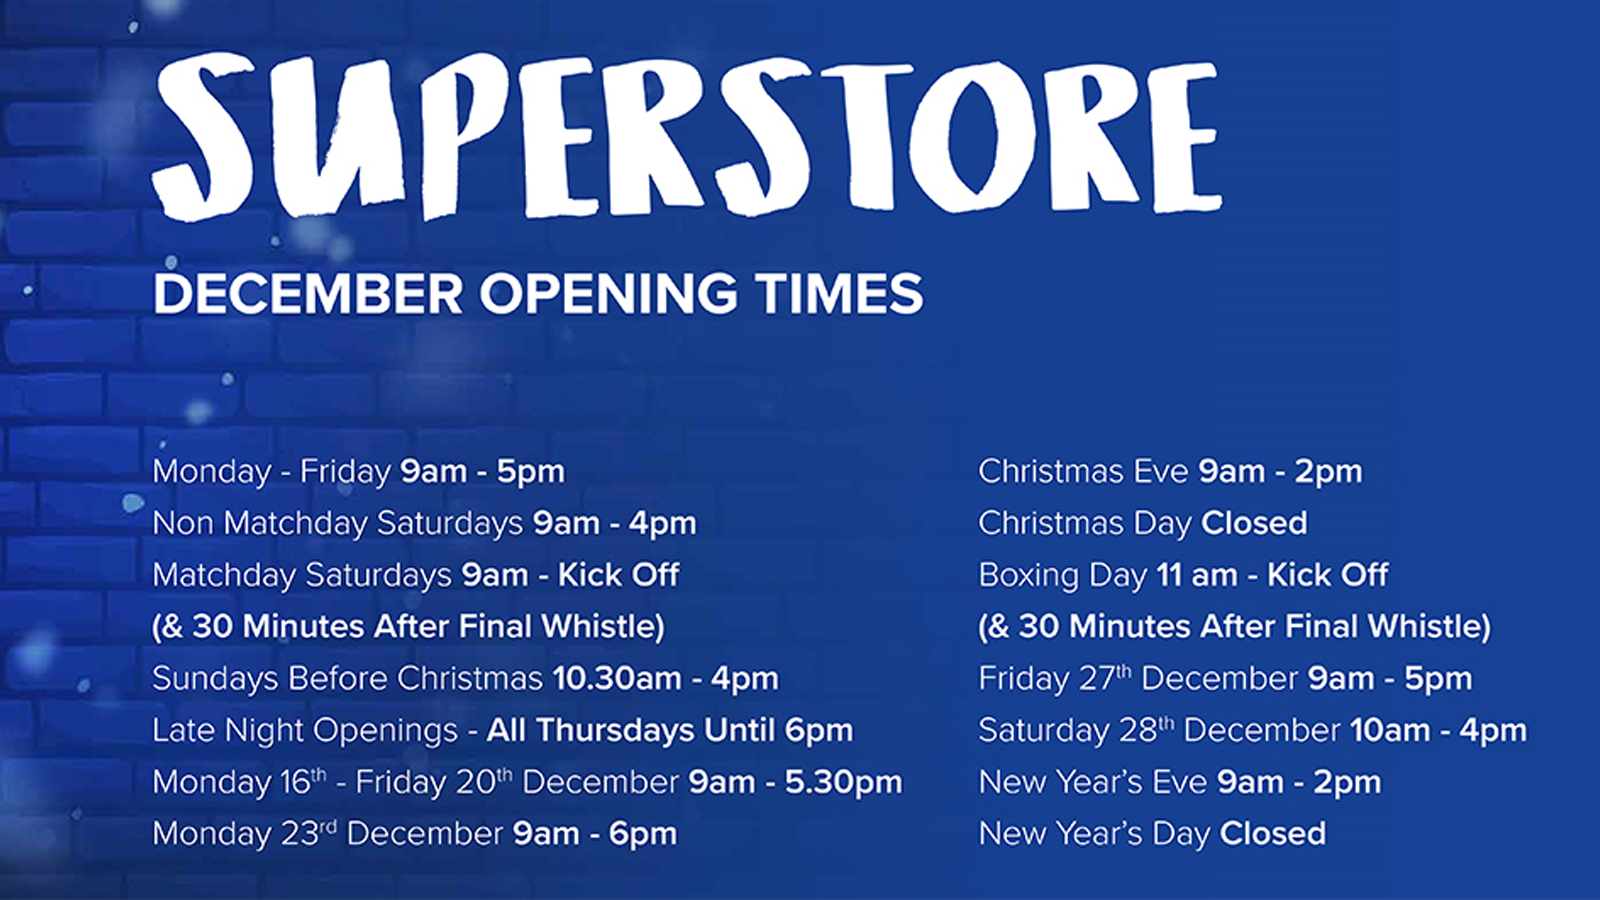 Cardiff City FC Store, Bank Holiday weekend opening times